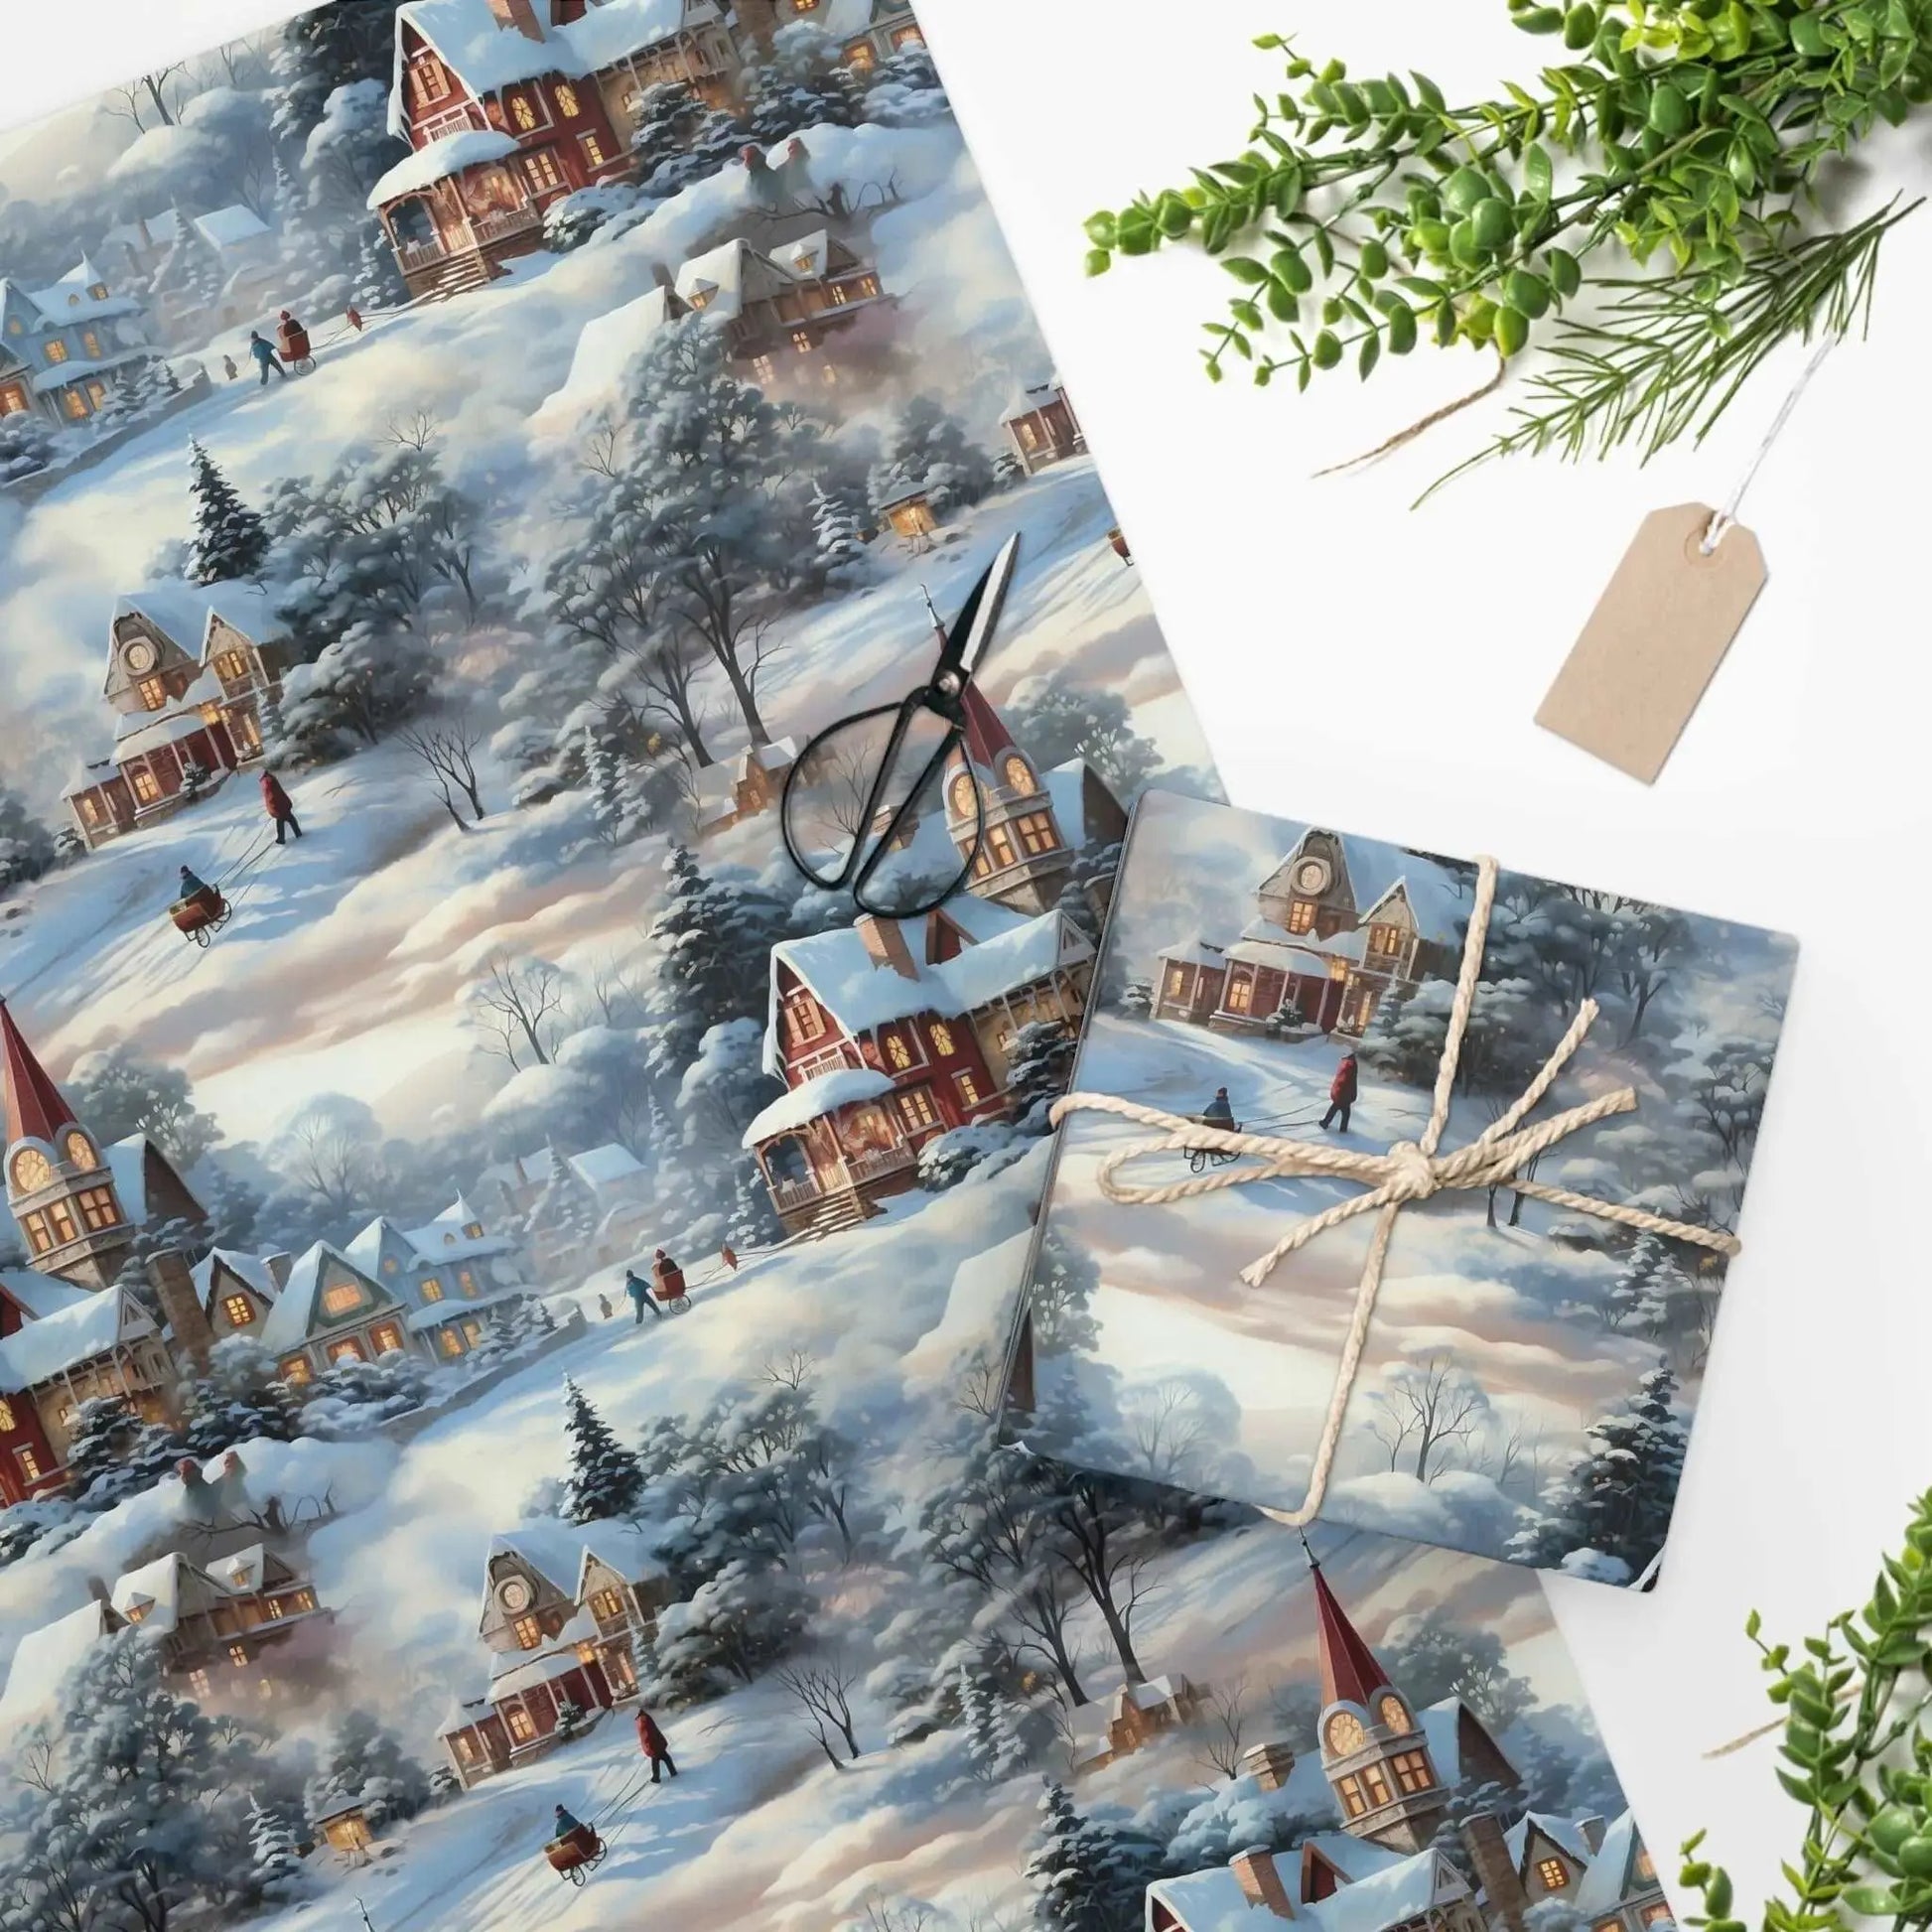 Small Town Vintage Christmas Wrapping Paper Rolls - The Curated Goose